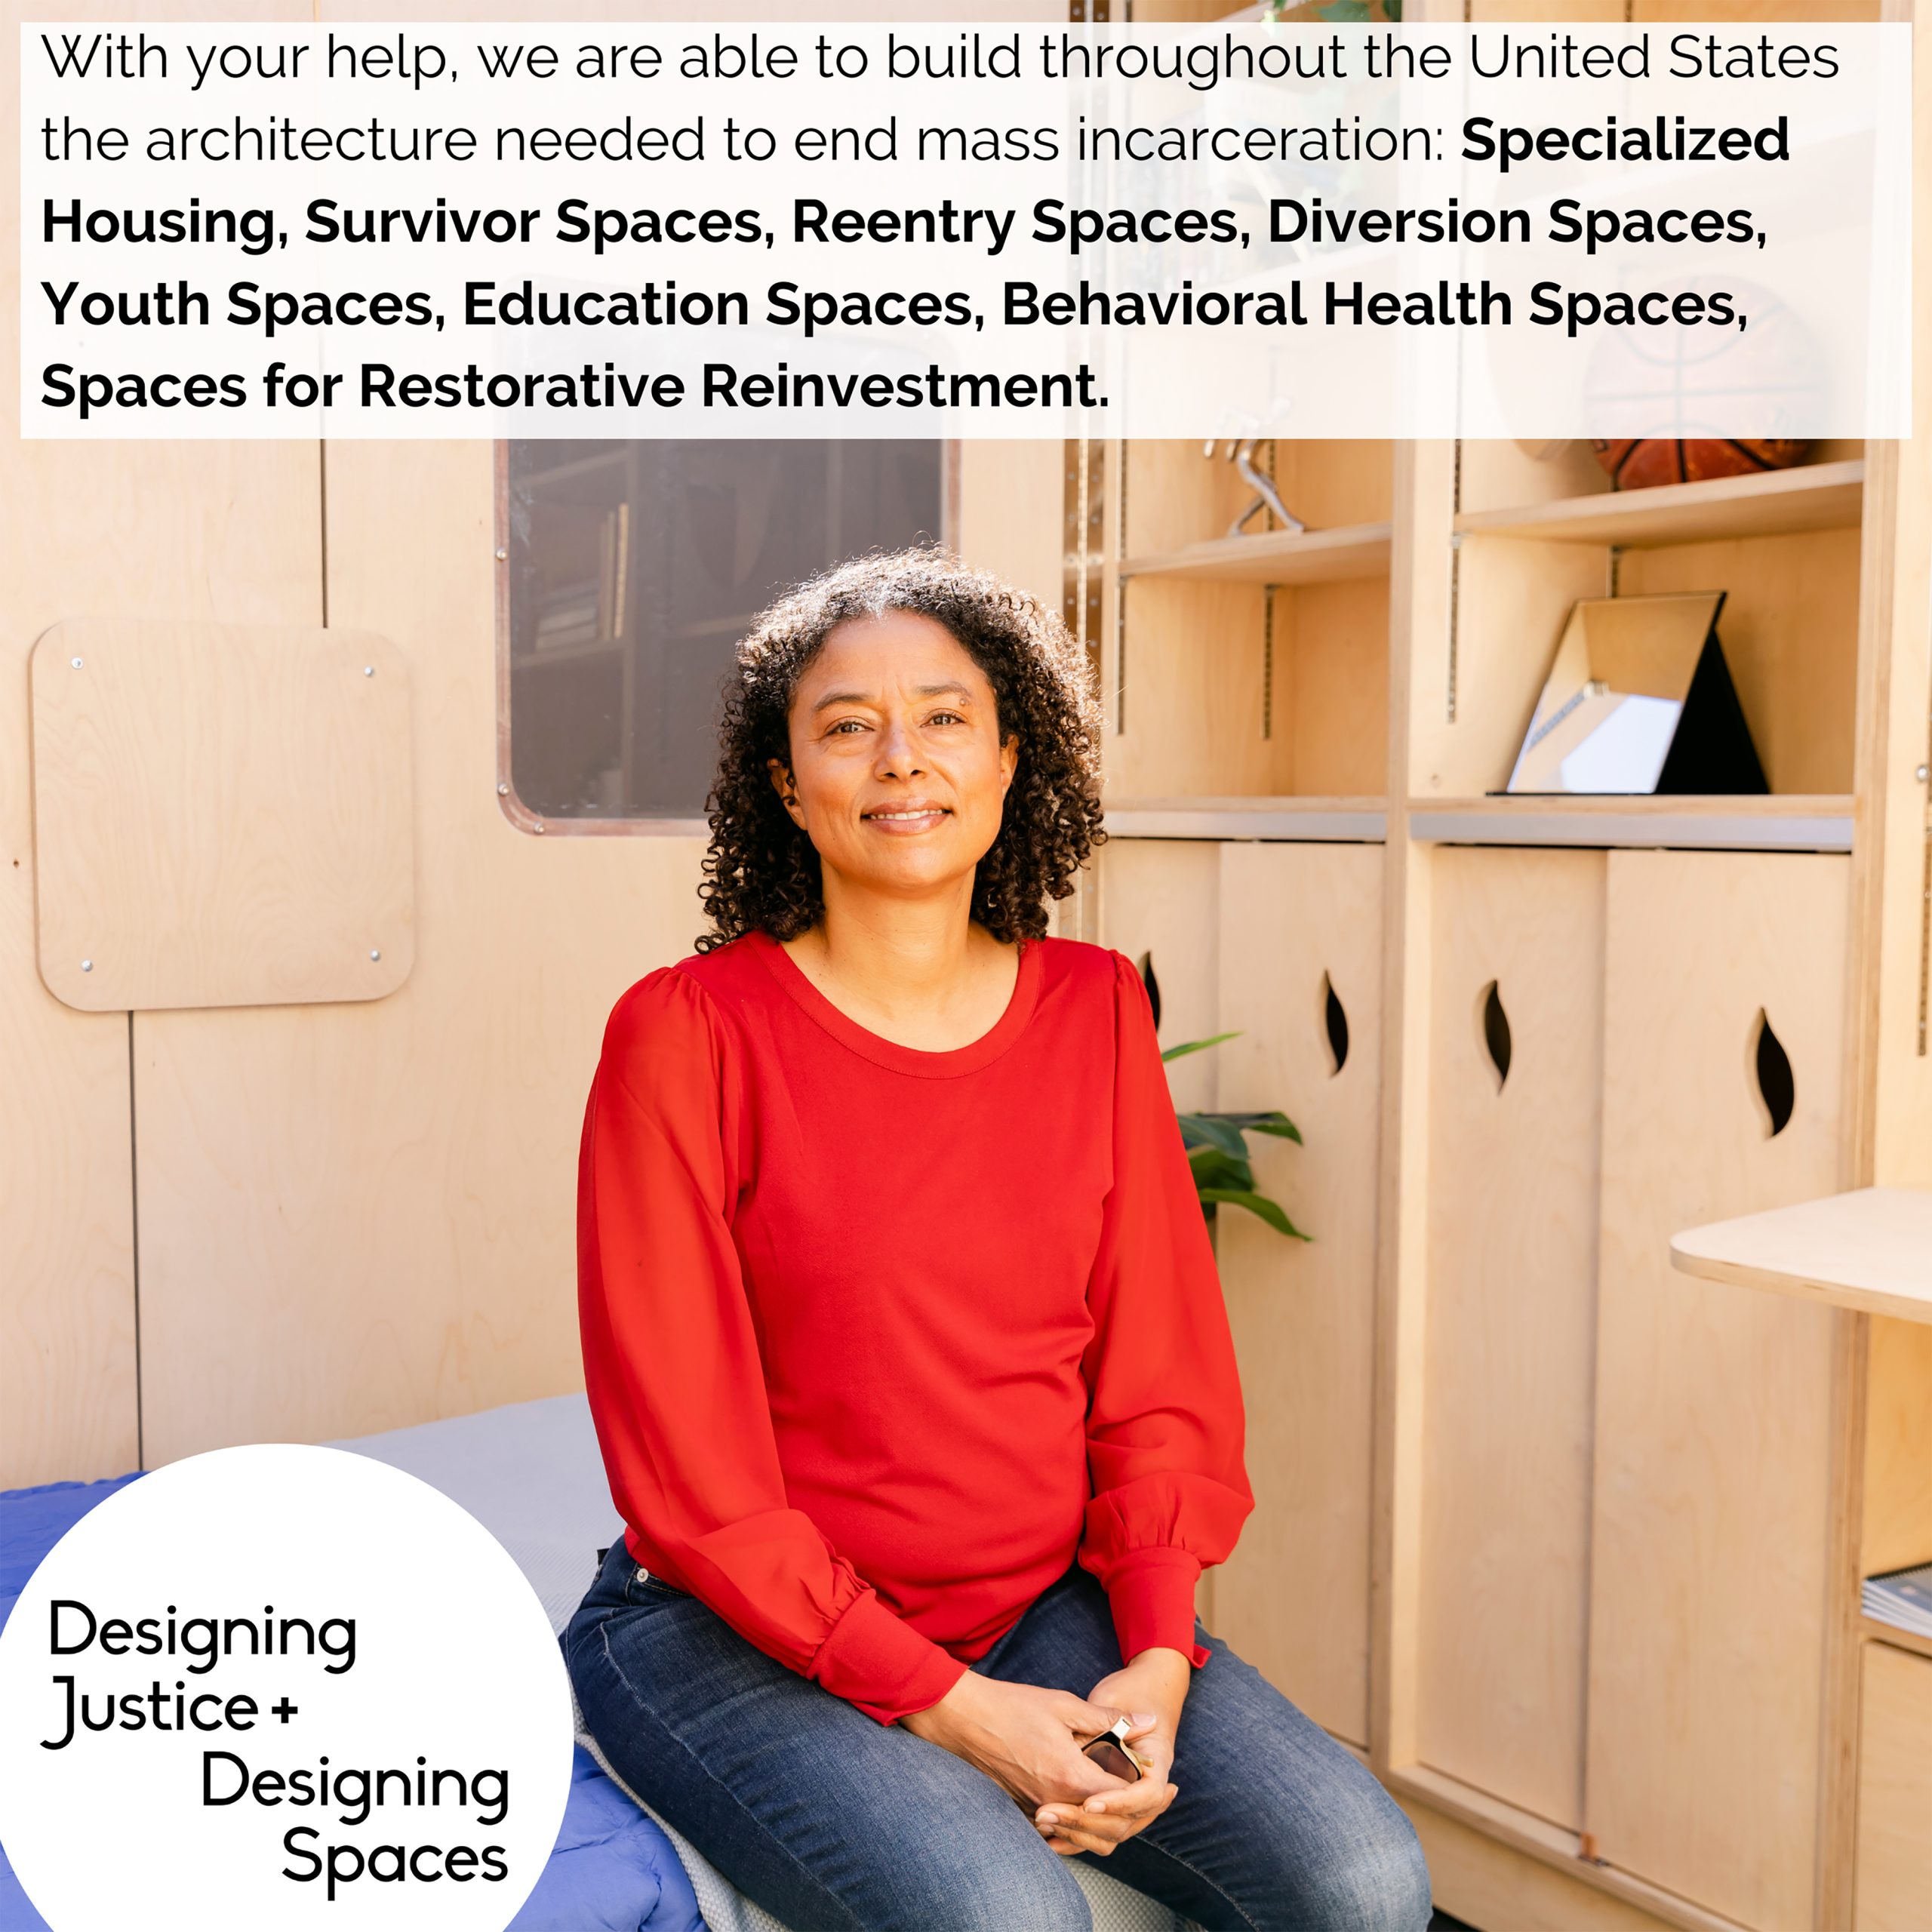 A graphic with text listing the spaces created by Designing Justice with A4J support over a photograph of Deanna Van Buren, a Black woman in a red top and warm smile, sitting on a bed in one of the Designing Justice designed spaces.